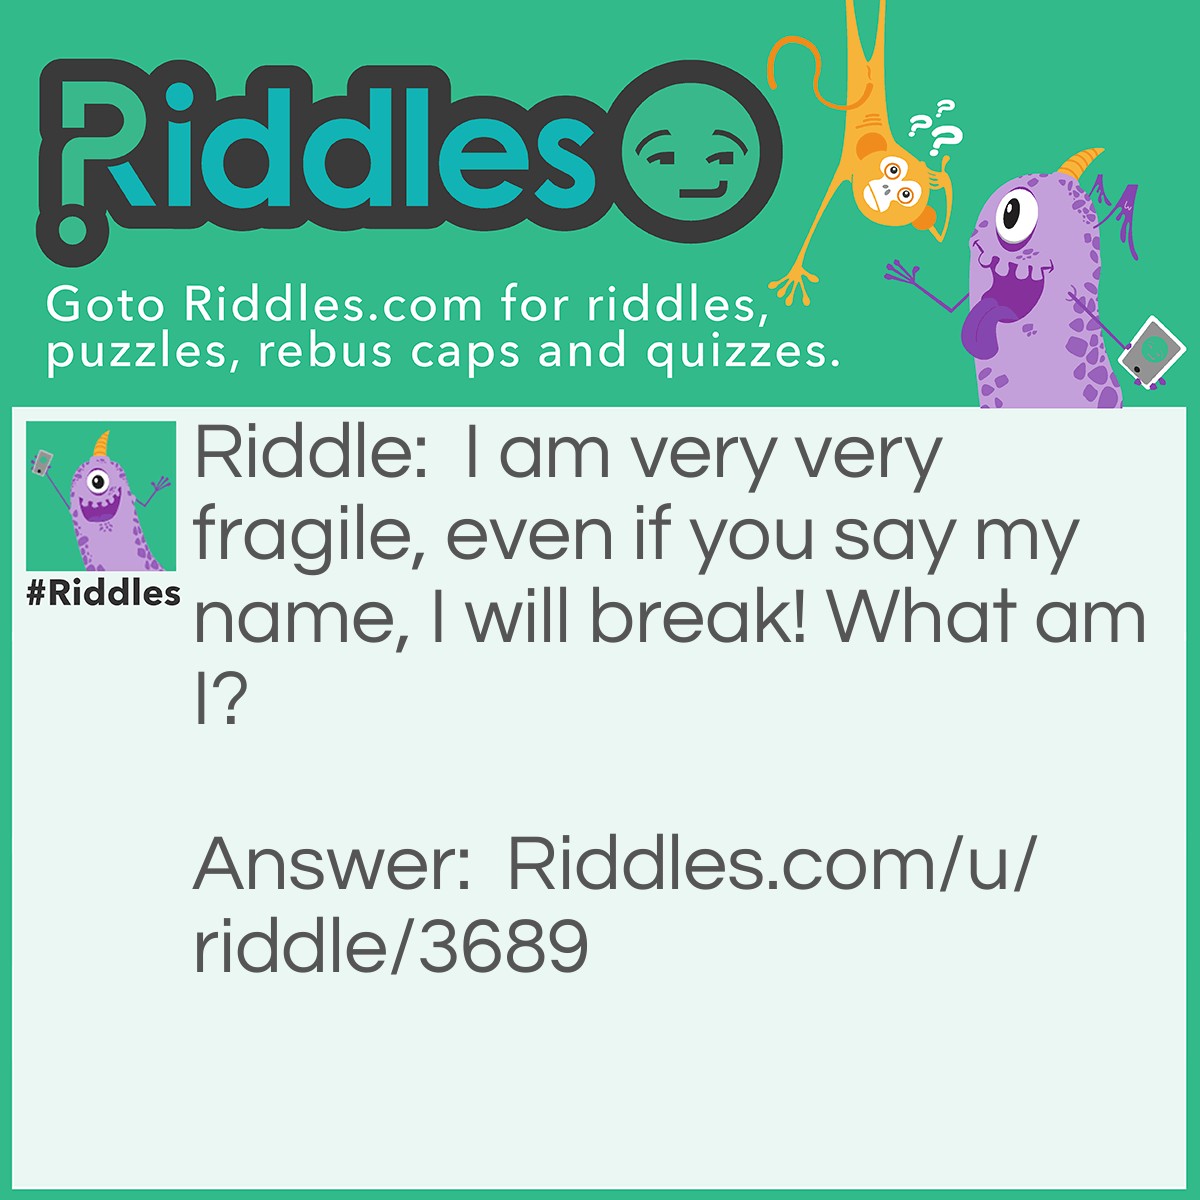 Riddle: I am very very fragile, even if you say my name, I will break! What am I? Answer: Silence.